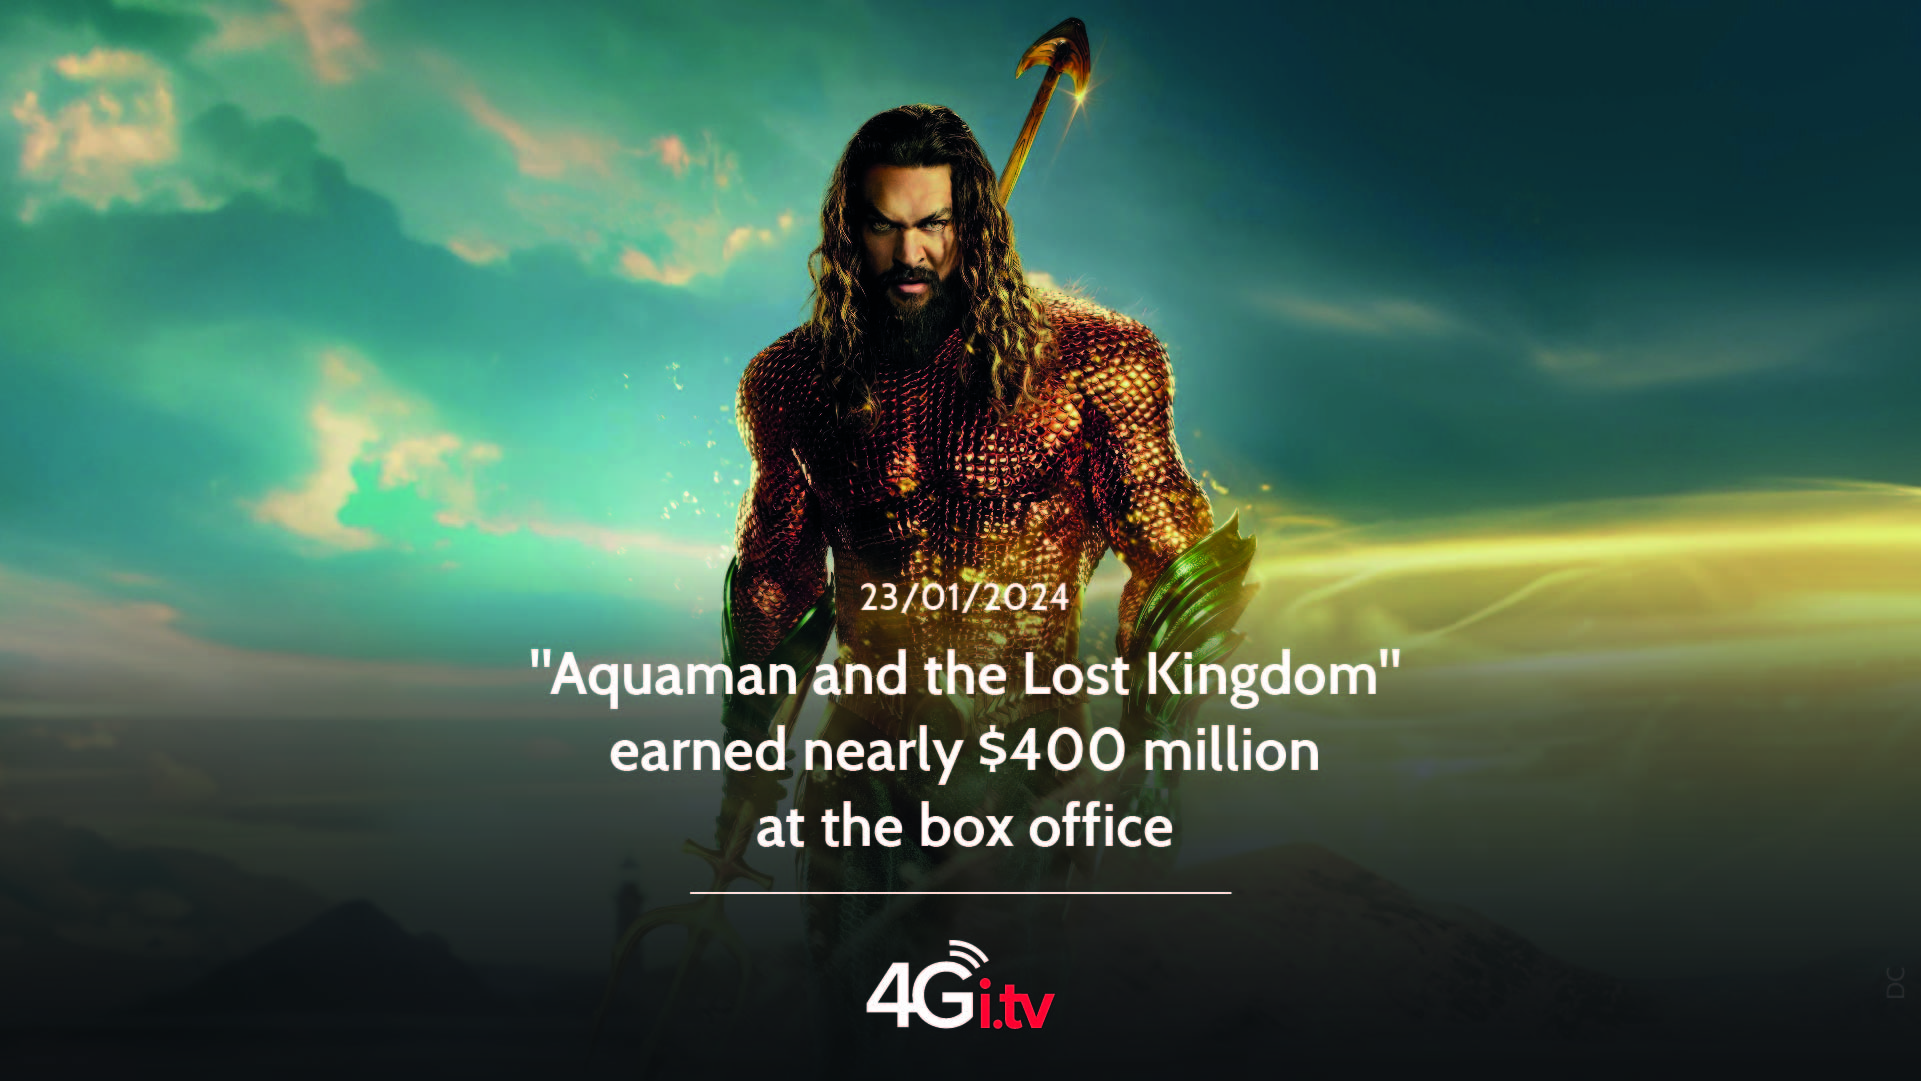 Lesen Sie mehr über den Artikel “Aquaman and the Lost Kingdom” earned nearly $400 million at the box office